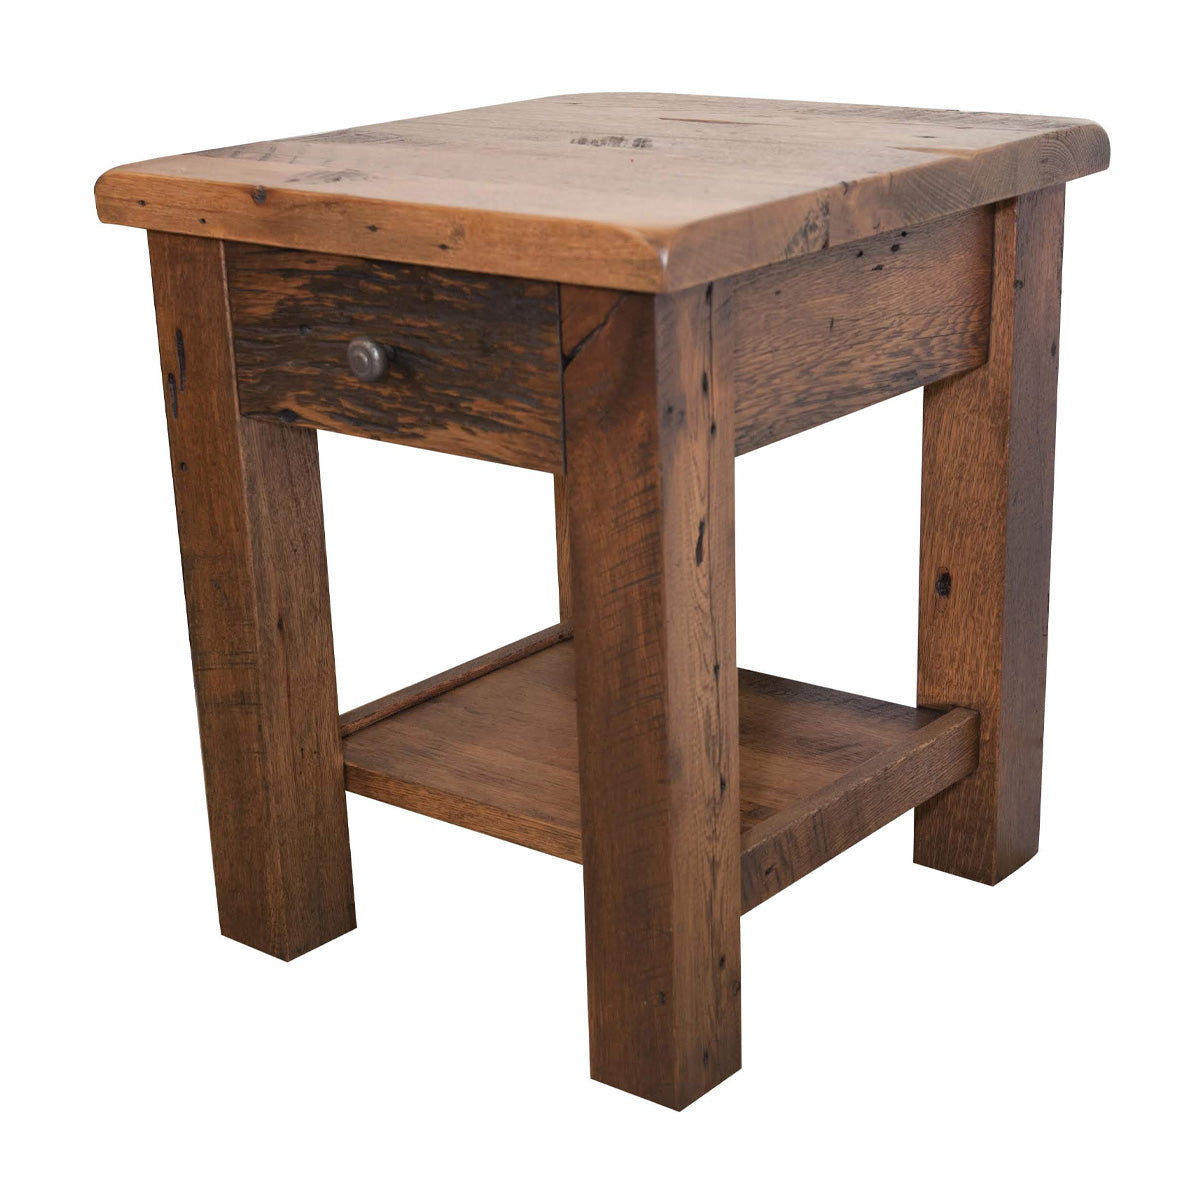 Rustic Reclaimed Wood End Table with Drawer